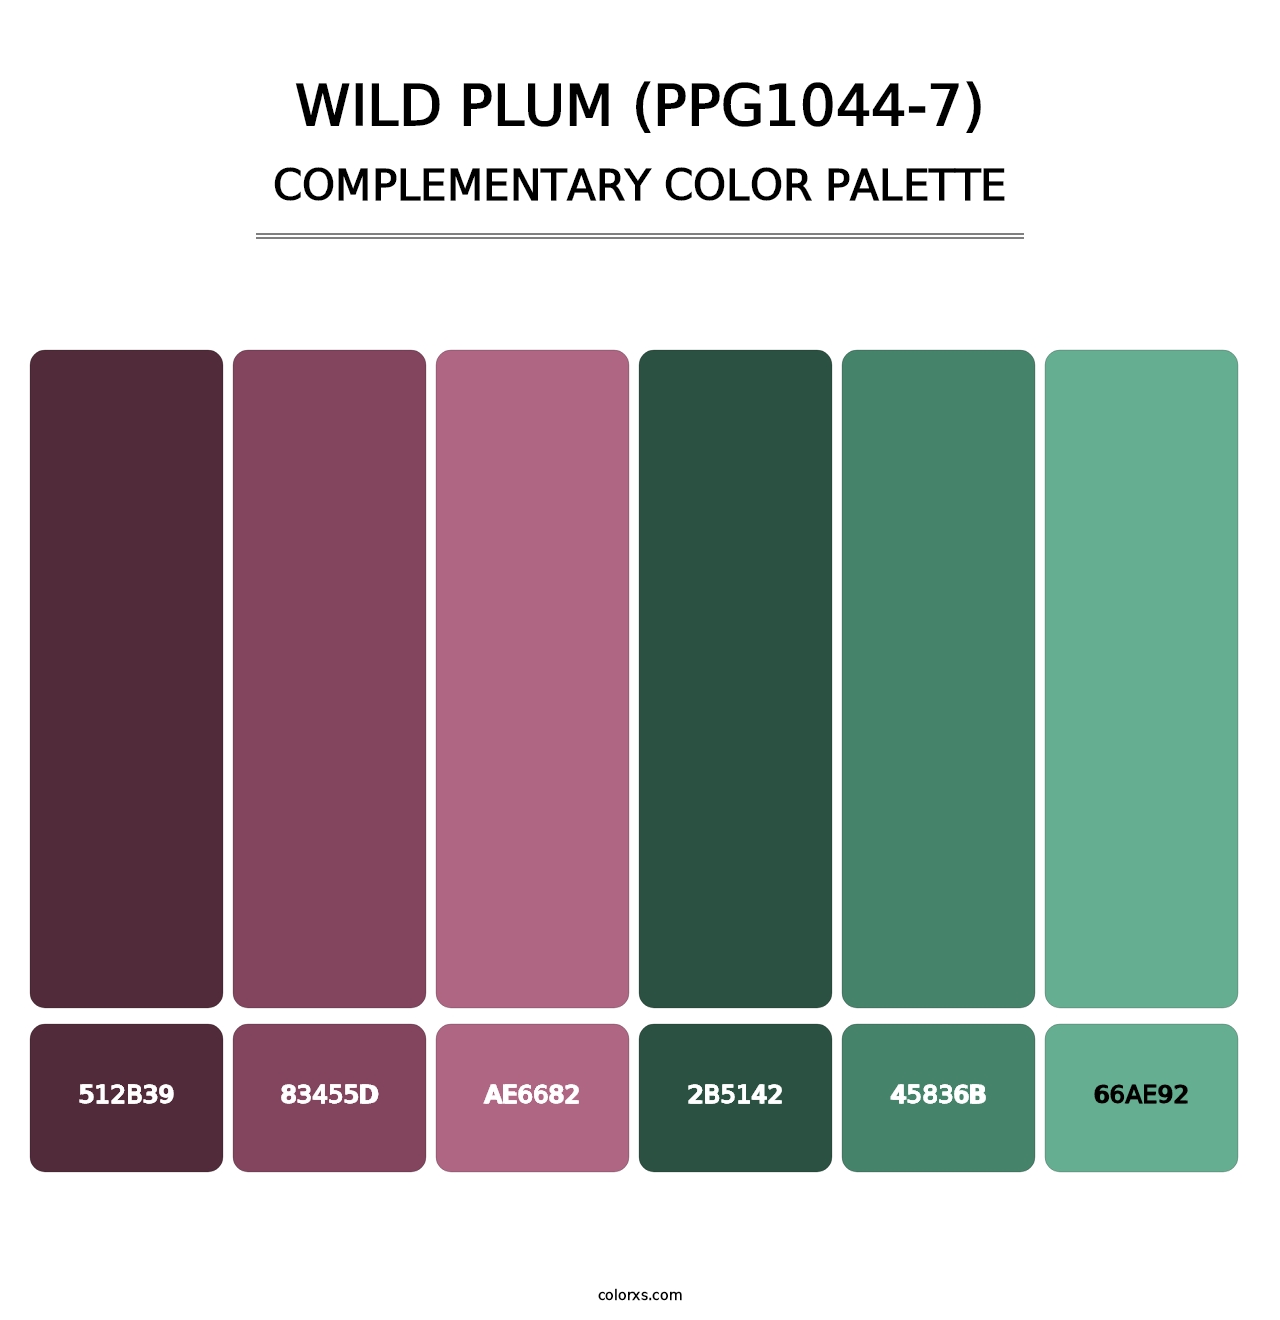 Wild Plum (PPG1044-7) - Complementary Color Palette